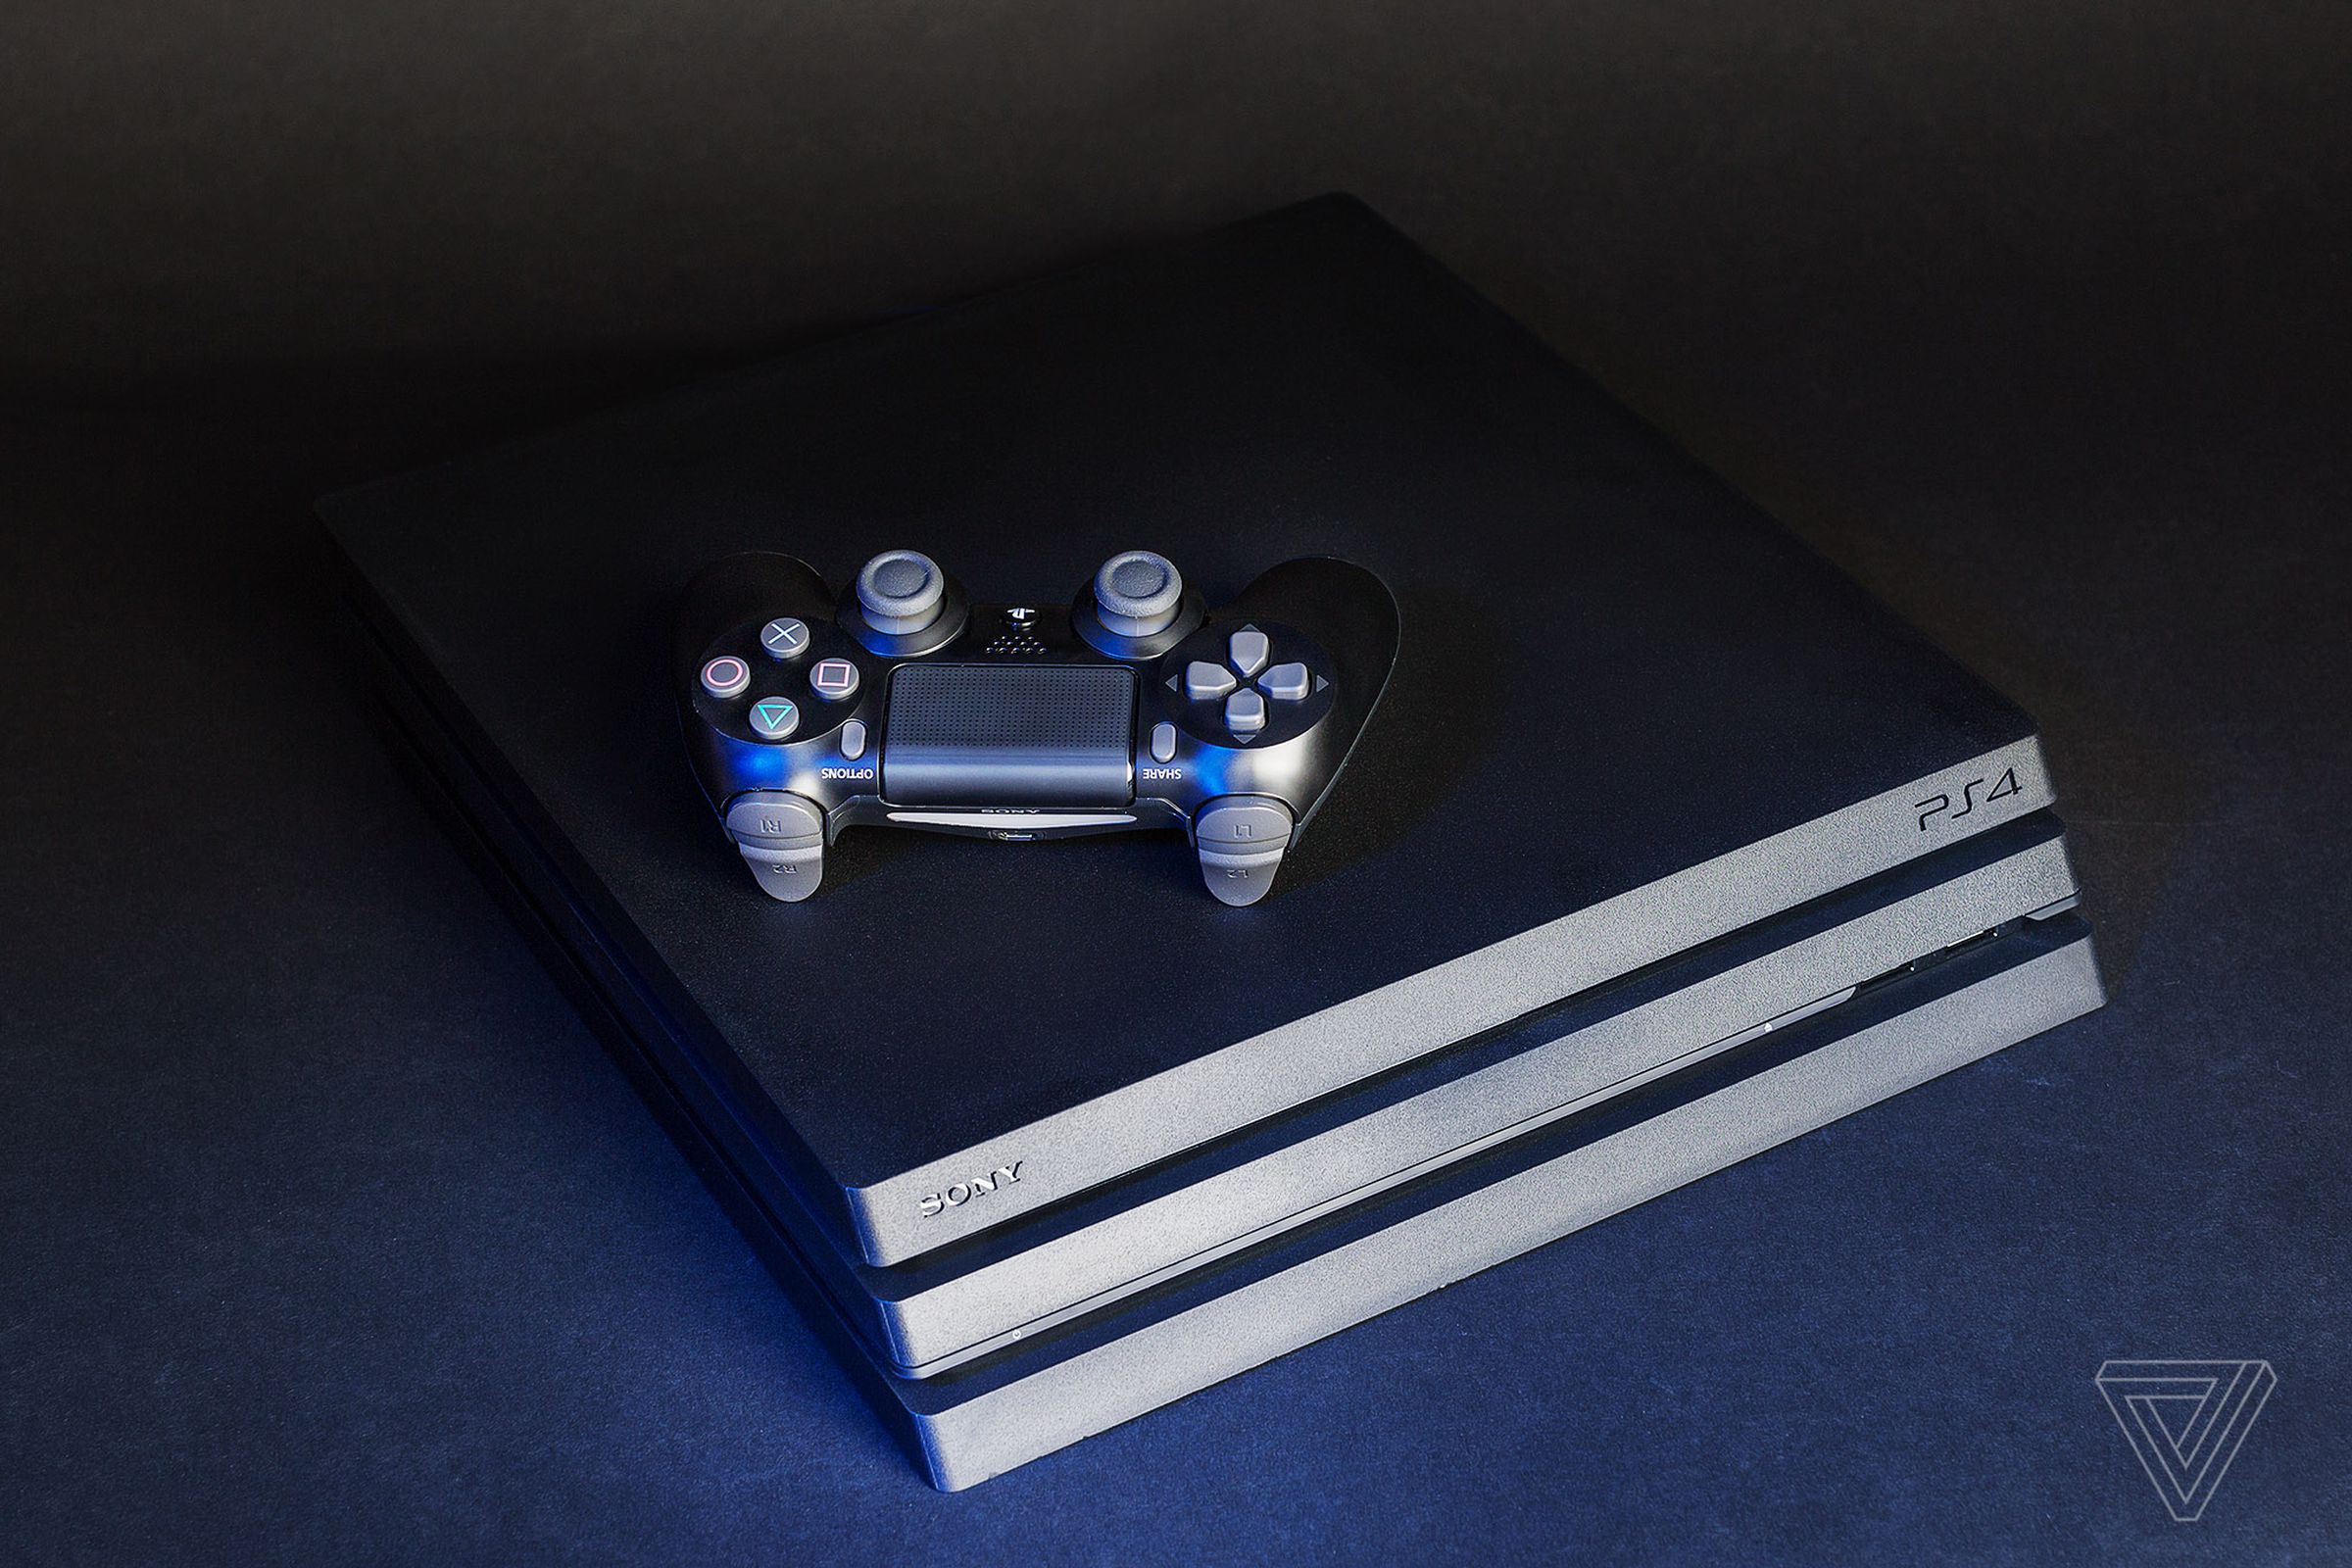 The original launch PS4 Pro (pictured) could get very loud under load.